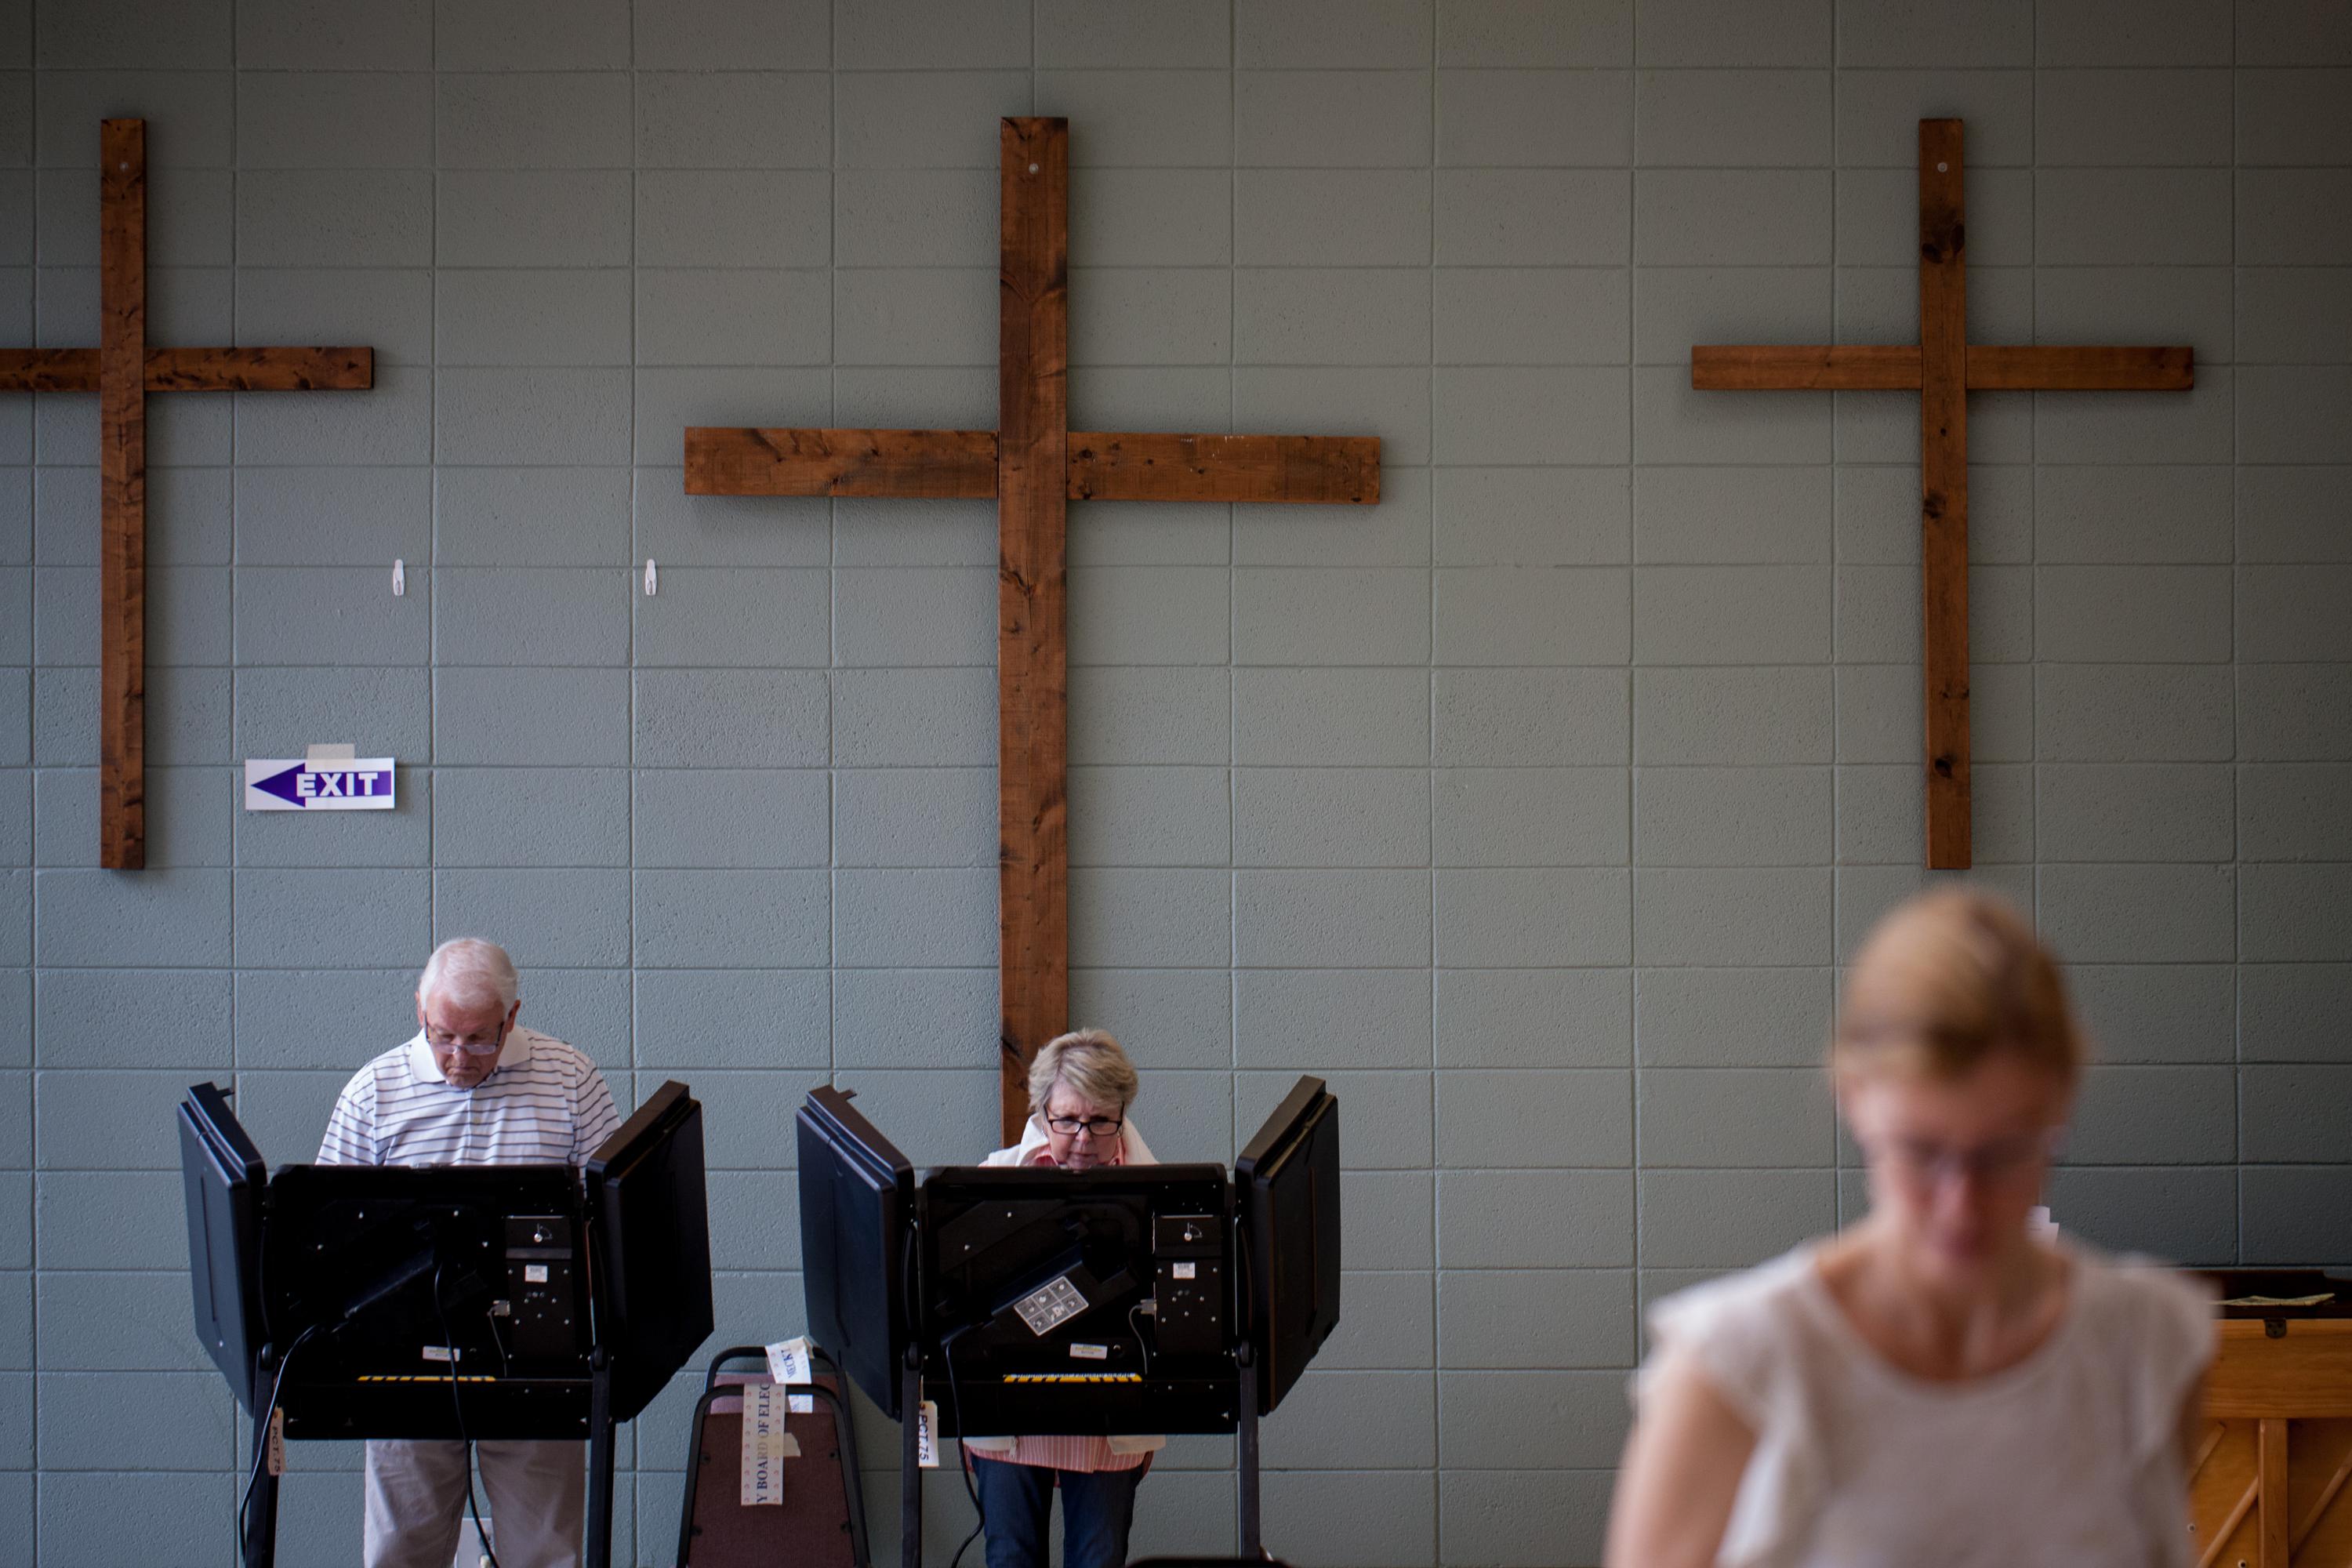 Two people at voting booths. Three Christian crosses hang on the wall behind them.